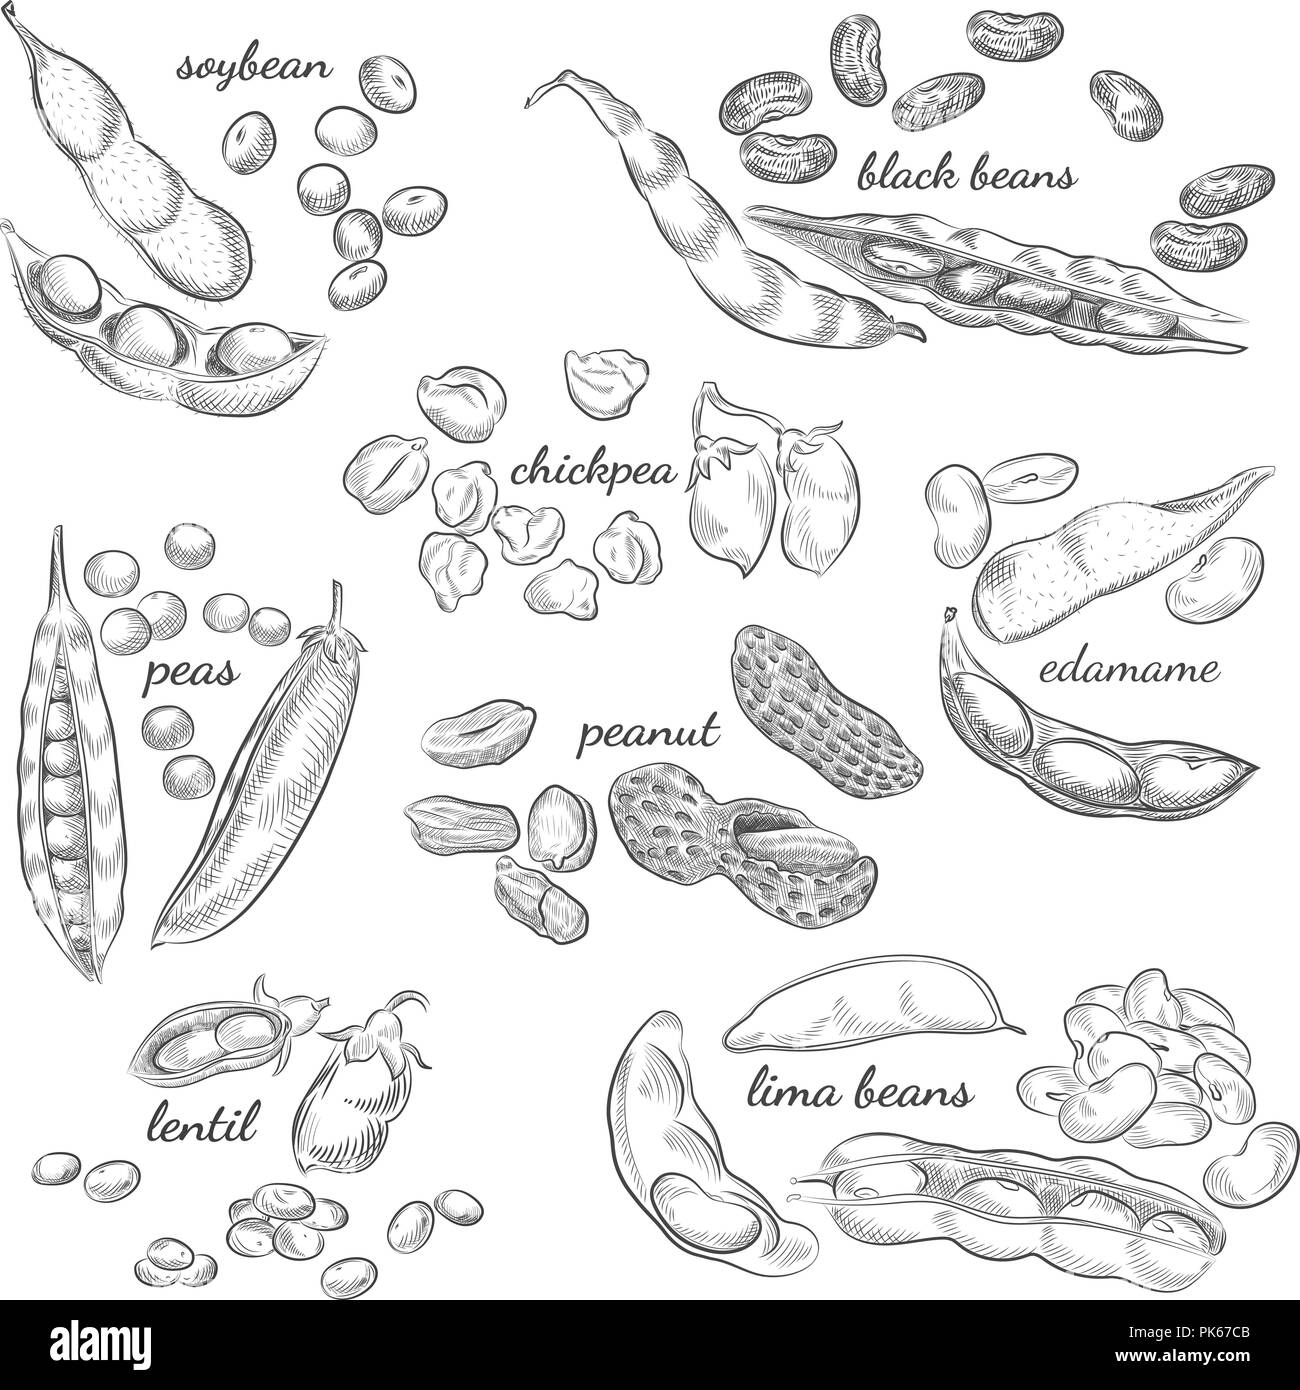 Legumes hand drawn illustration. Nuts, peas, beans, pods and shells sketches isolated on white background. Stock Vector